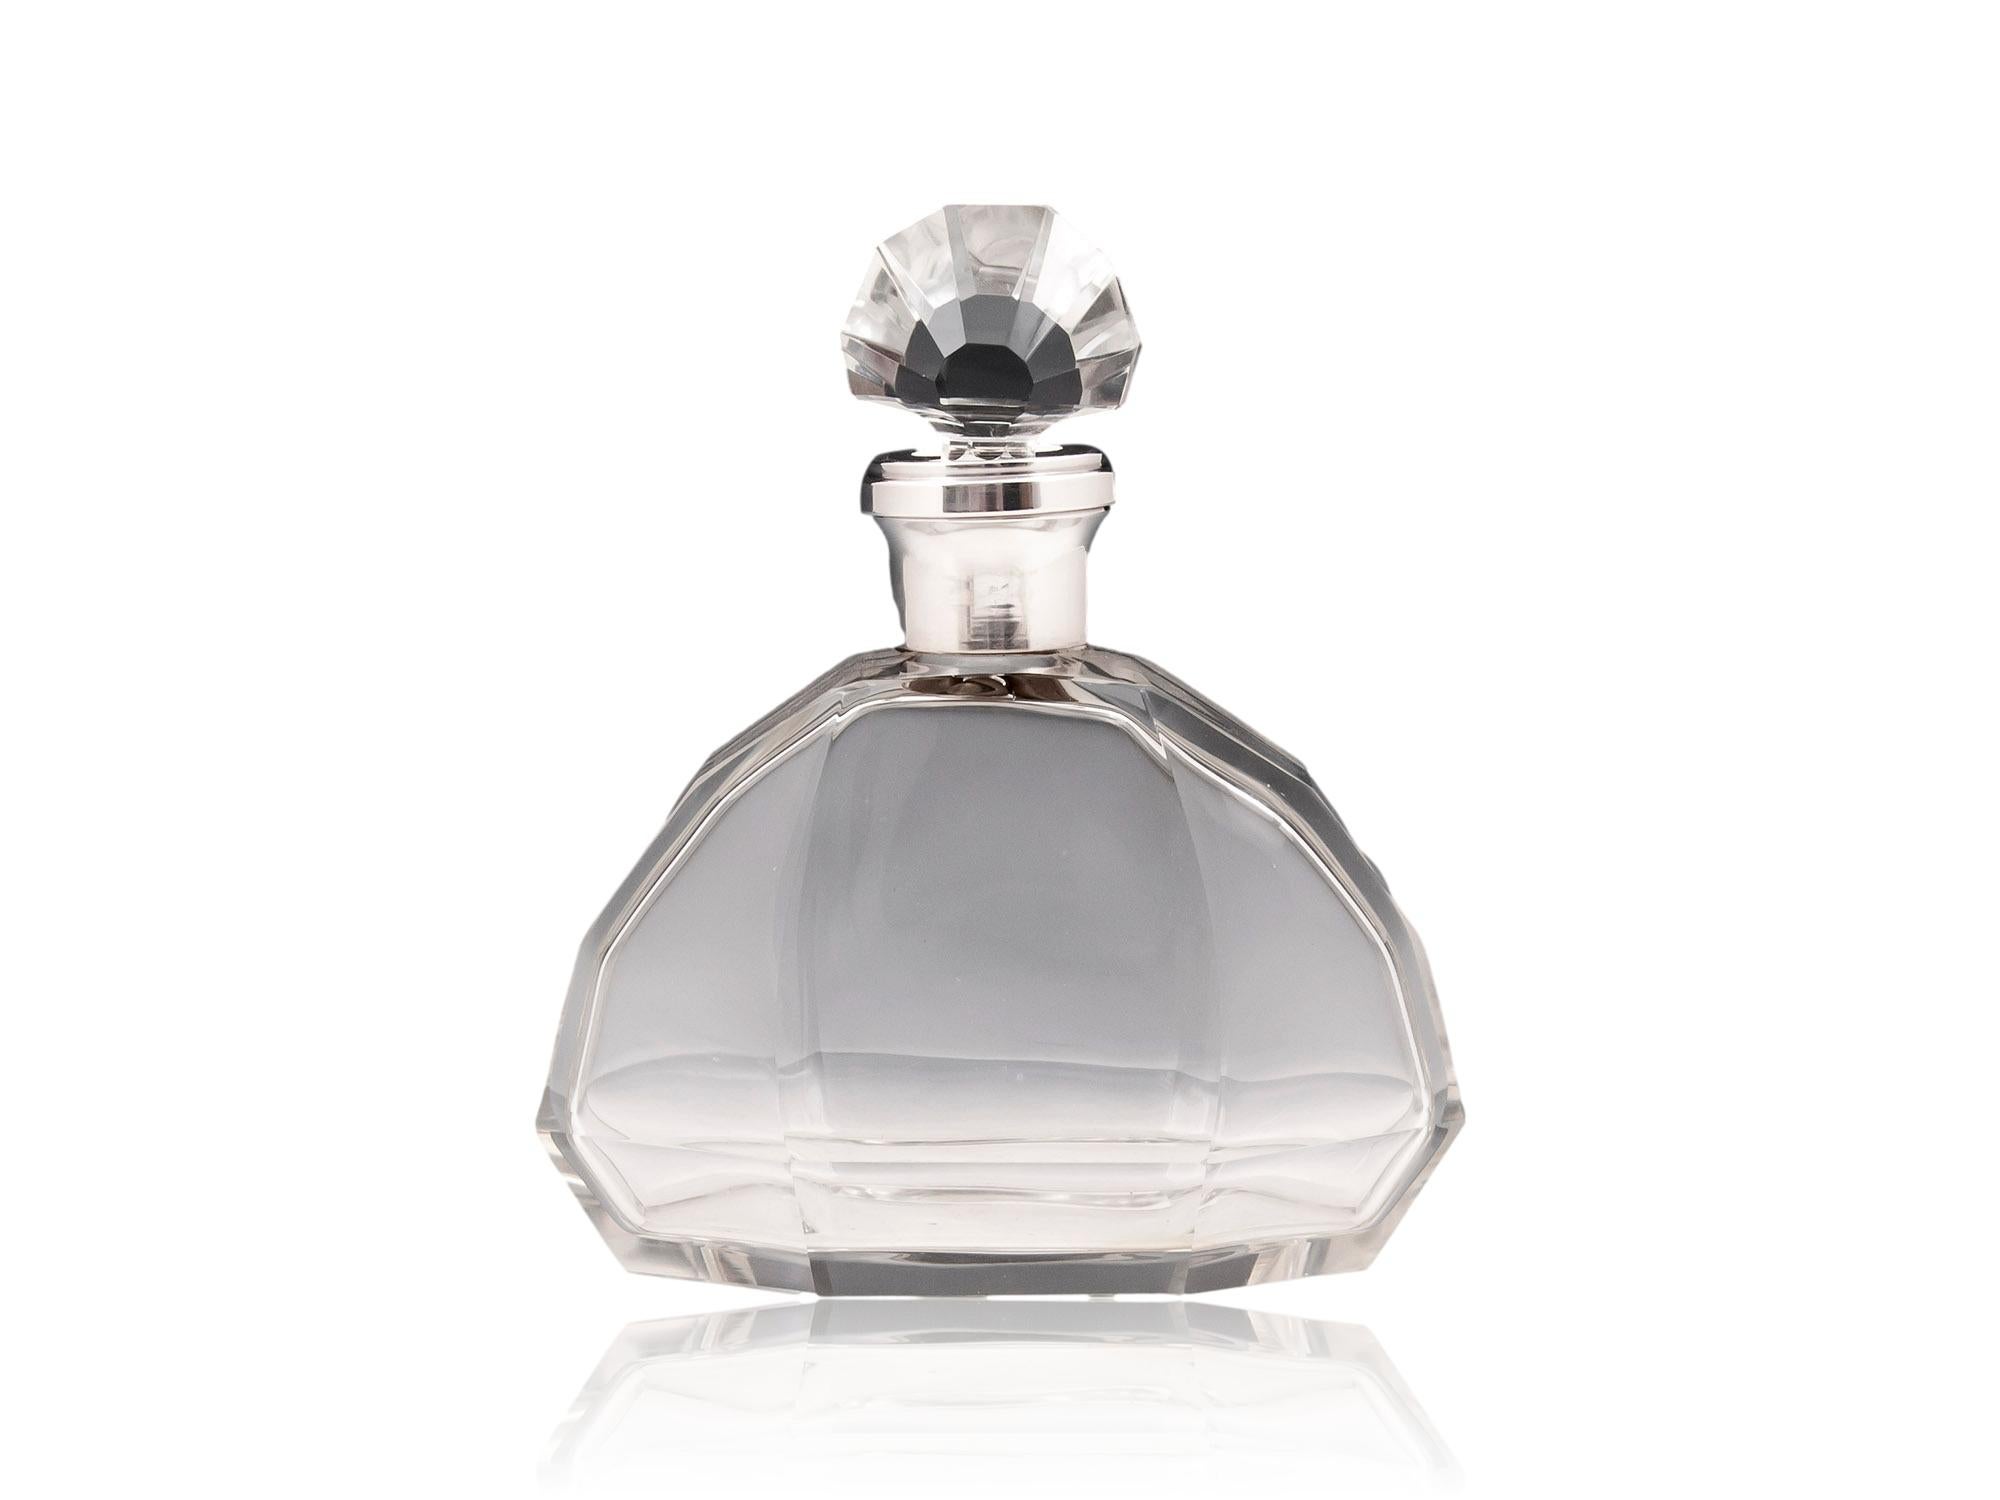 Featuring a Fan Shaped Body & Decanter

From our Decanter collection, we are delighted to offer this Art Deco Decanter. The Decanter with a wide tapered body with faceted faces surmounted by a continental French Silver collar and fan shaped stopper.